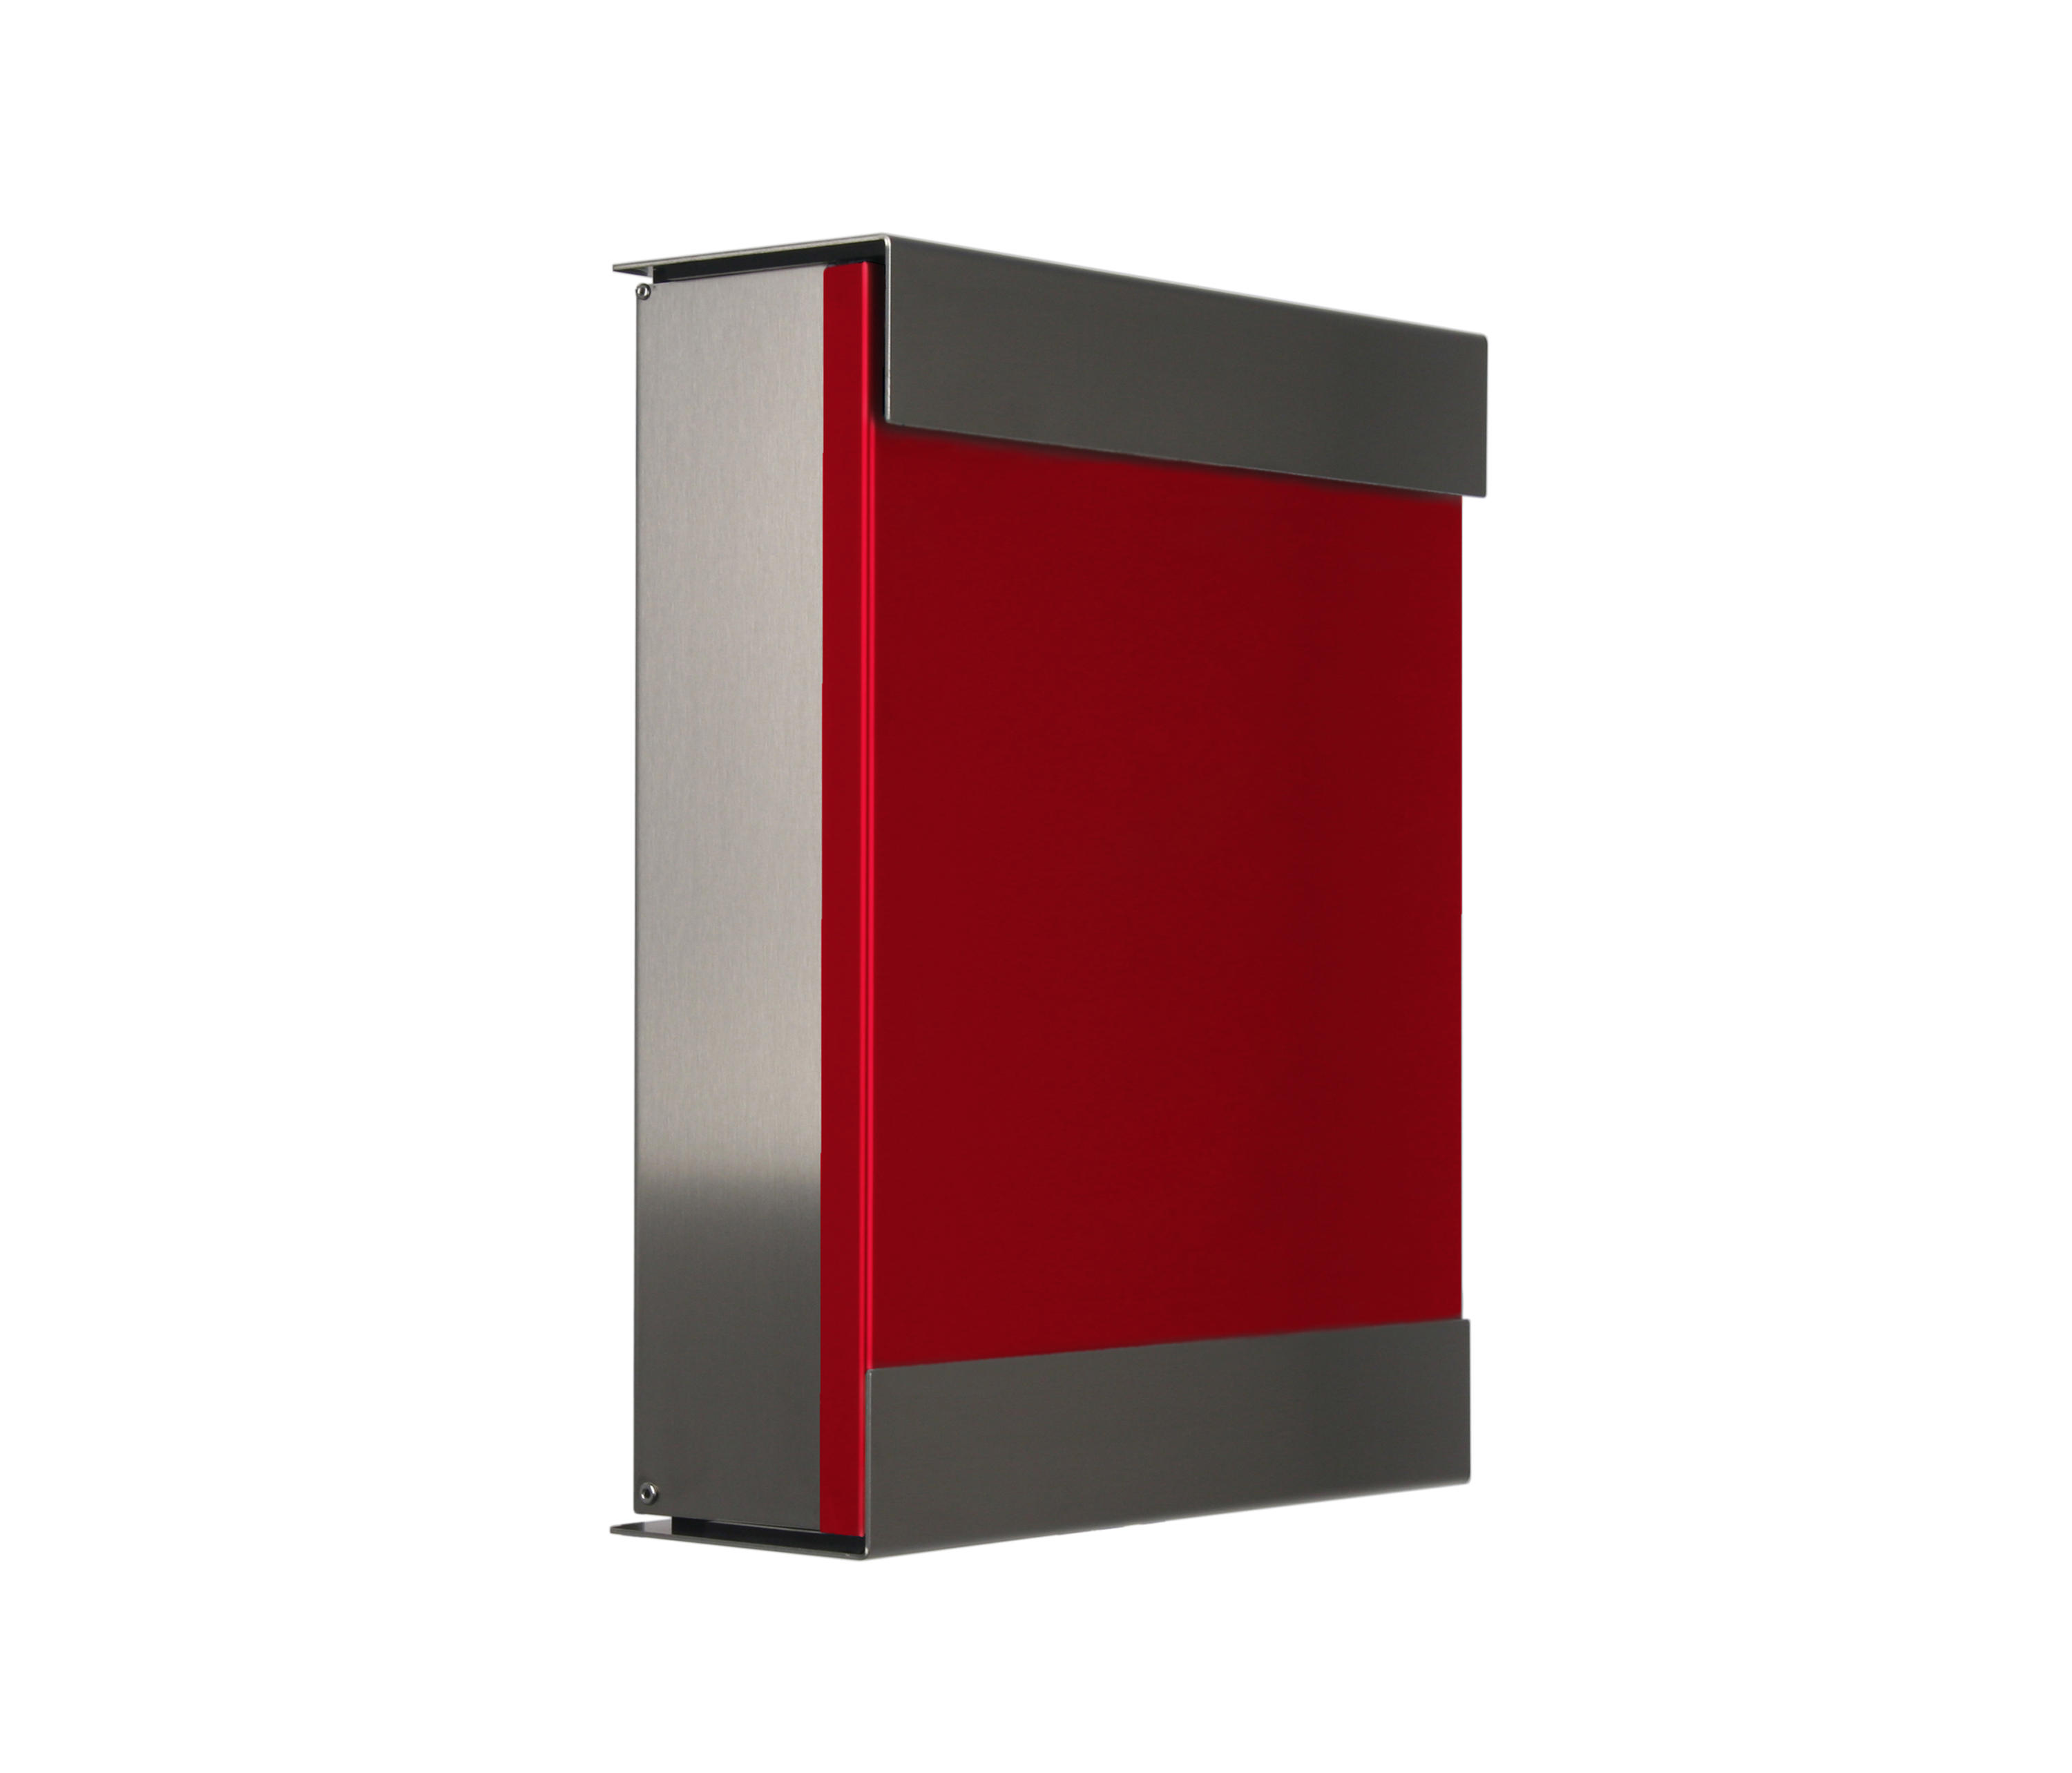 GLASNOST-COLOR-METAL MAILBOX - Mailboxes from keilbach | Architonic